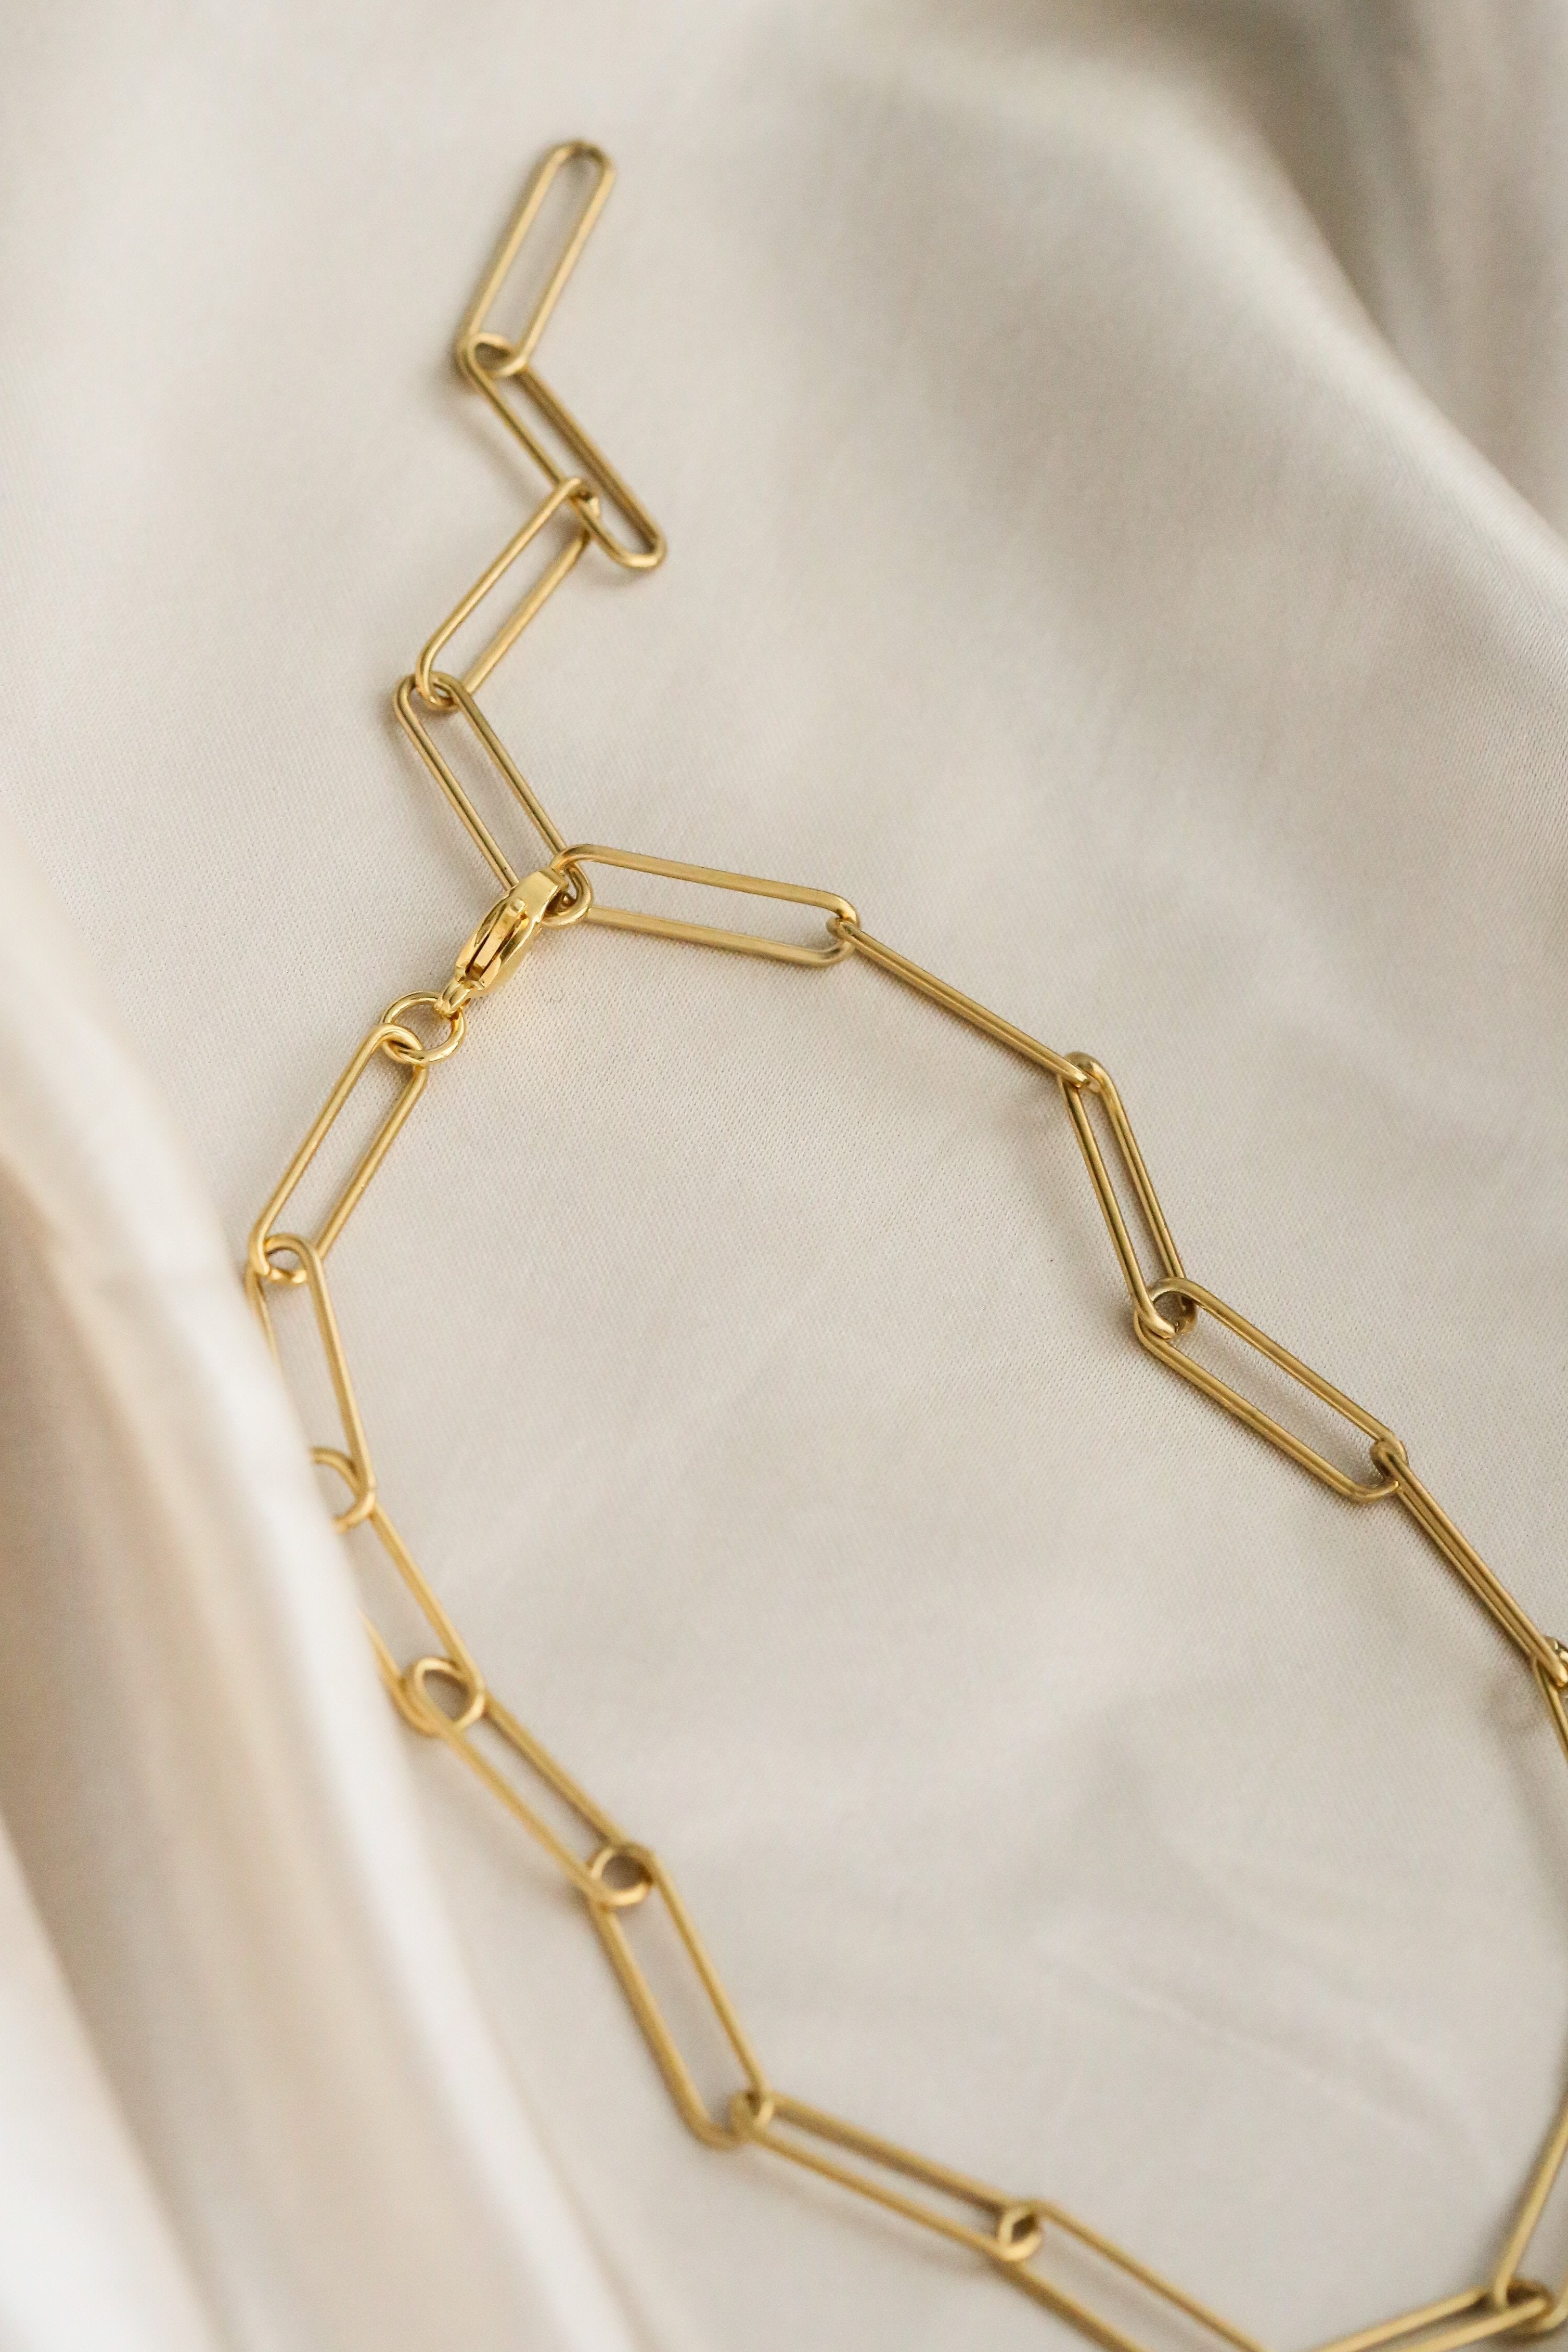 Lucius necklace - Boutique Minimaliste has waterproof, durable, elegant and vintage inspired jewelry